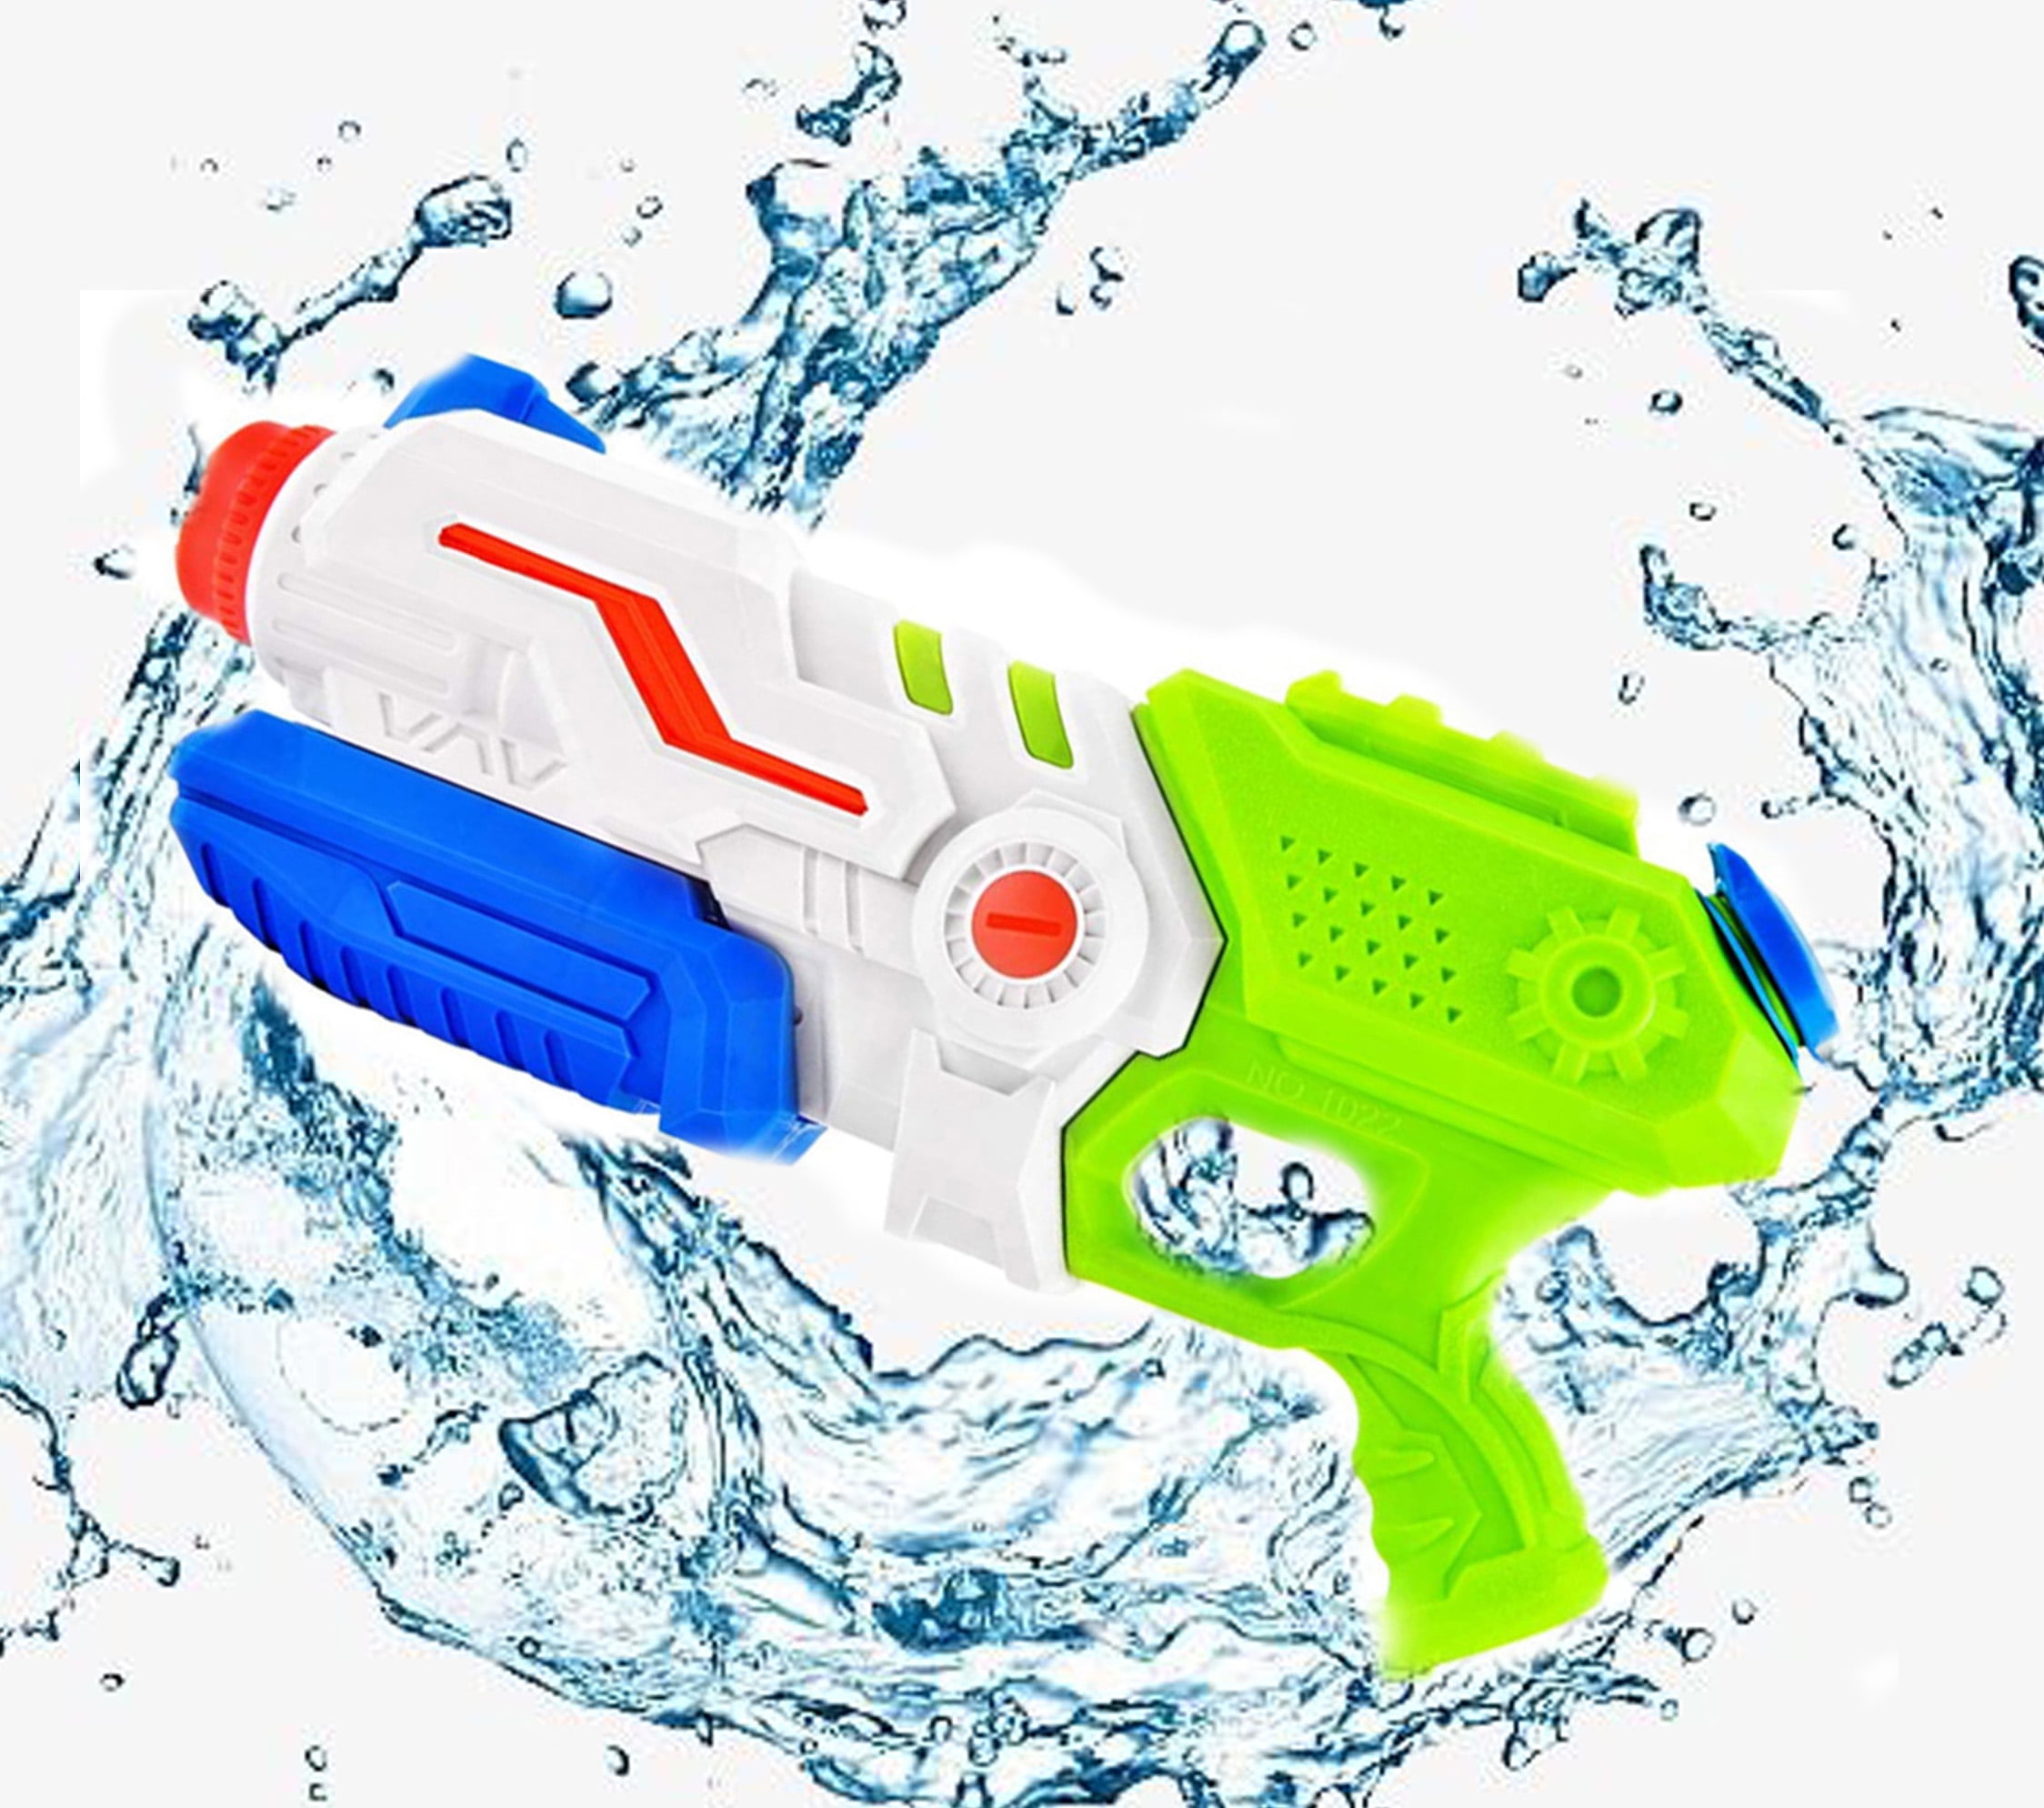 Details about   Heytech 2 Pack Super Water Gun Blaster 1200CC High Capacity Soaker Squirt Toy 